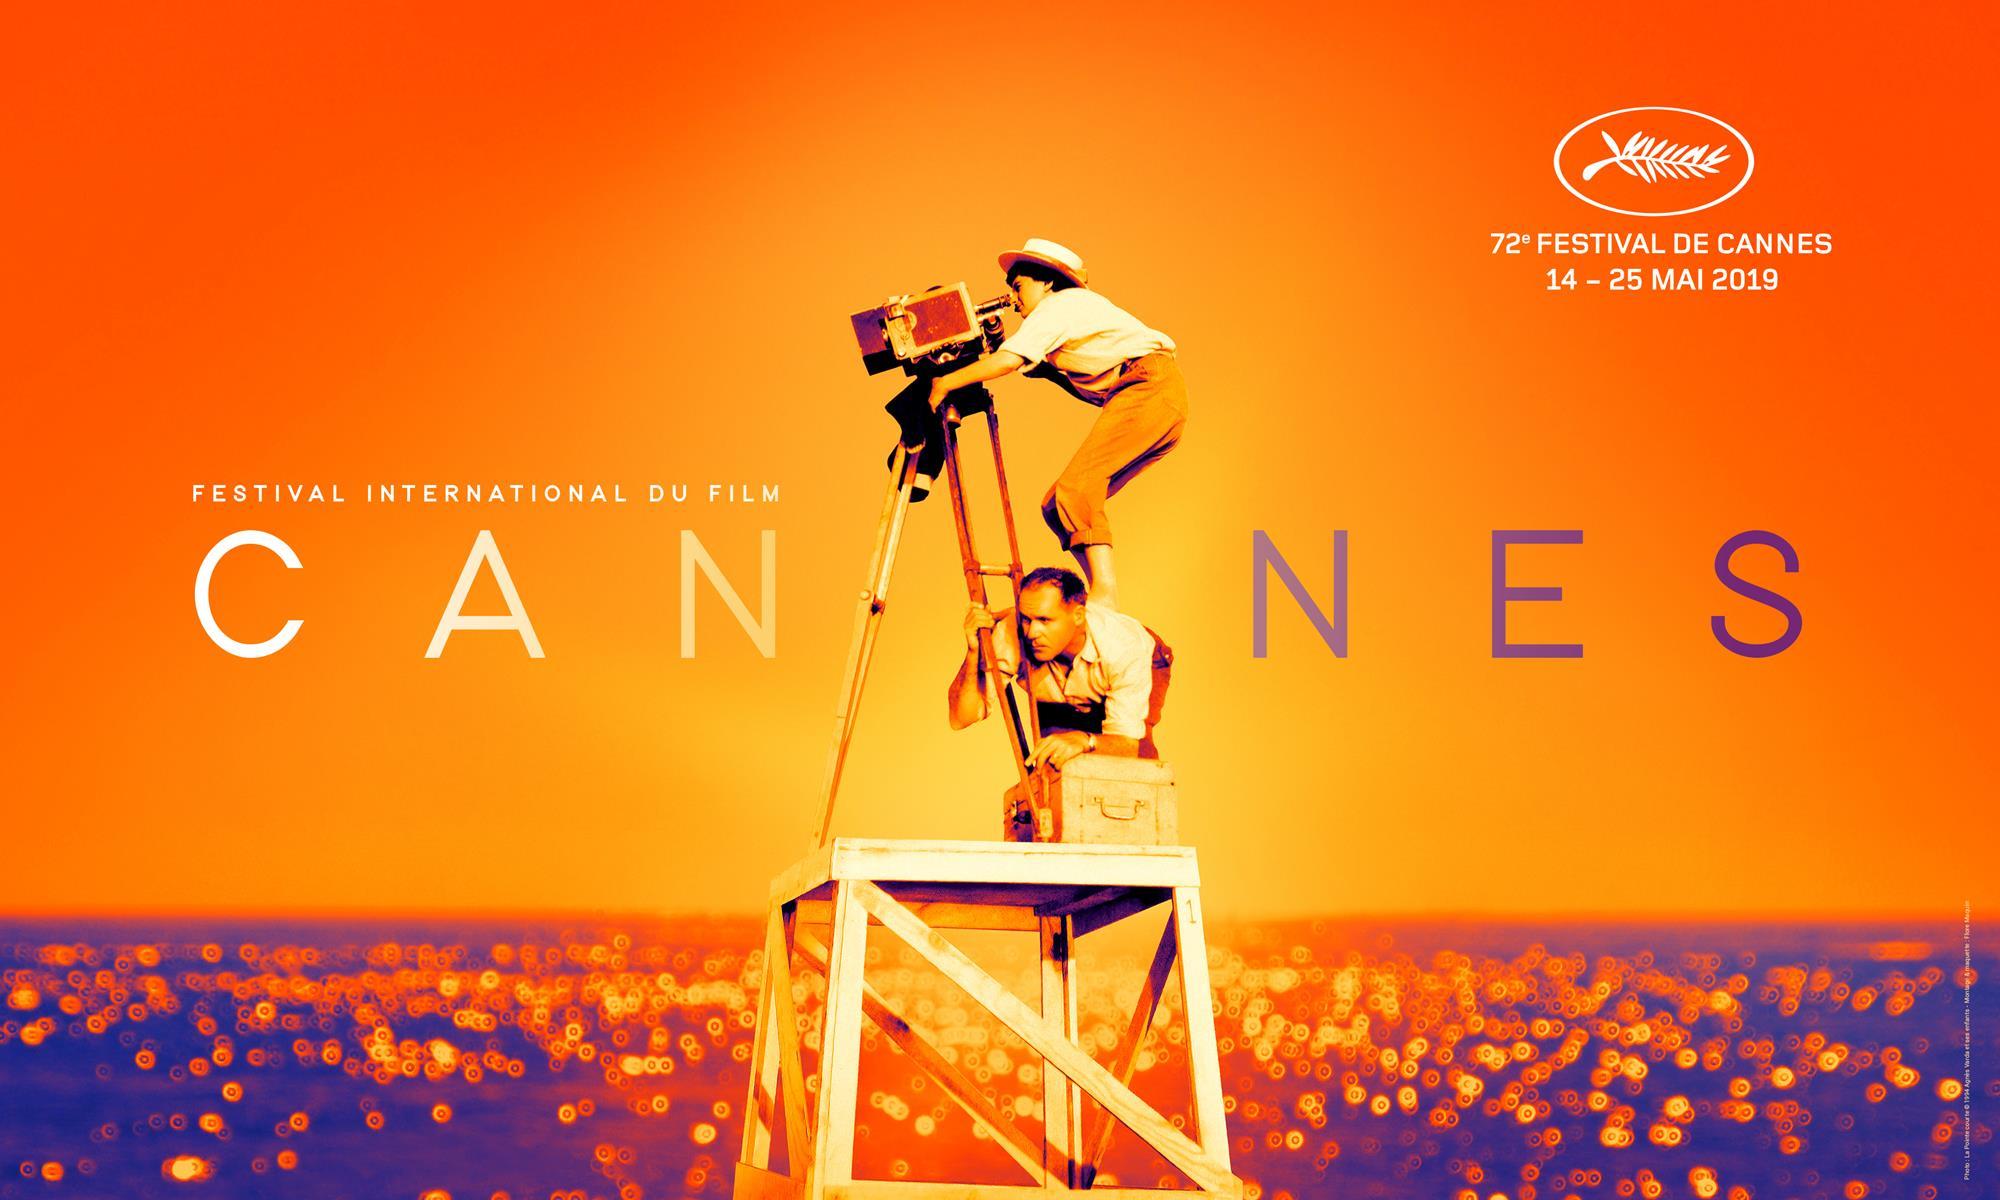 Official poster of the 72nd Cannes International Film Festival revealed